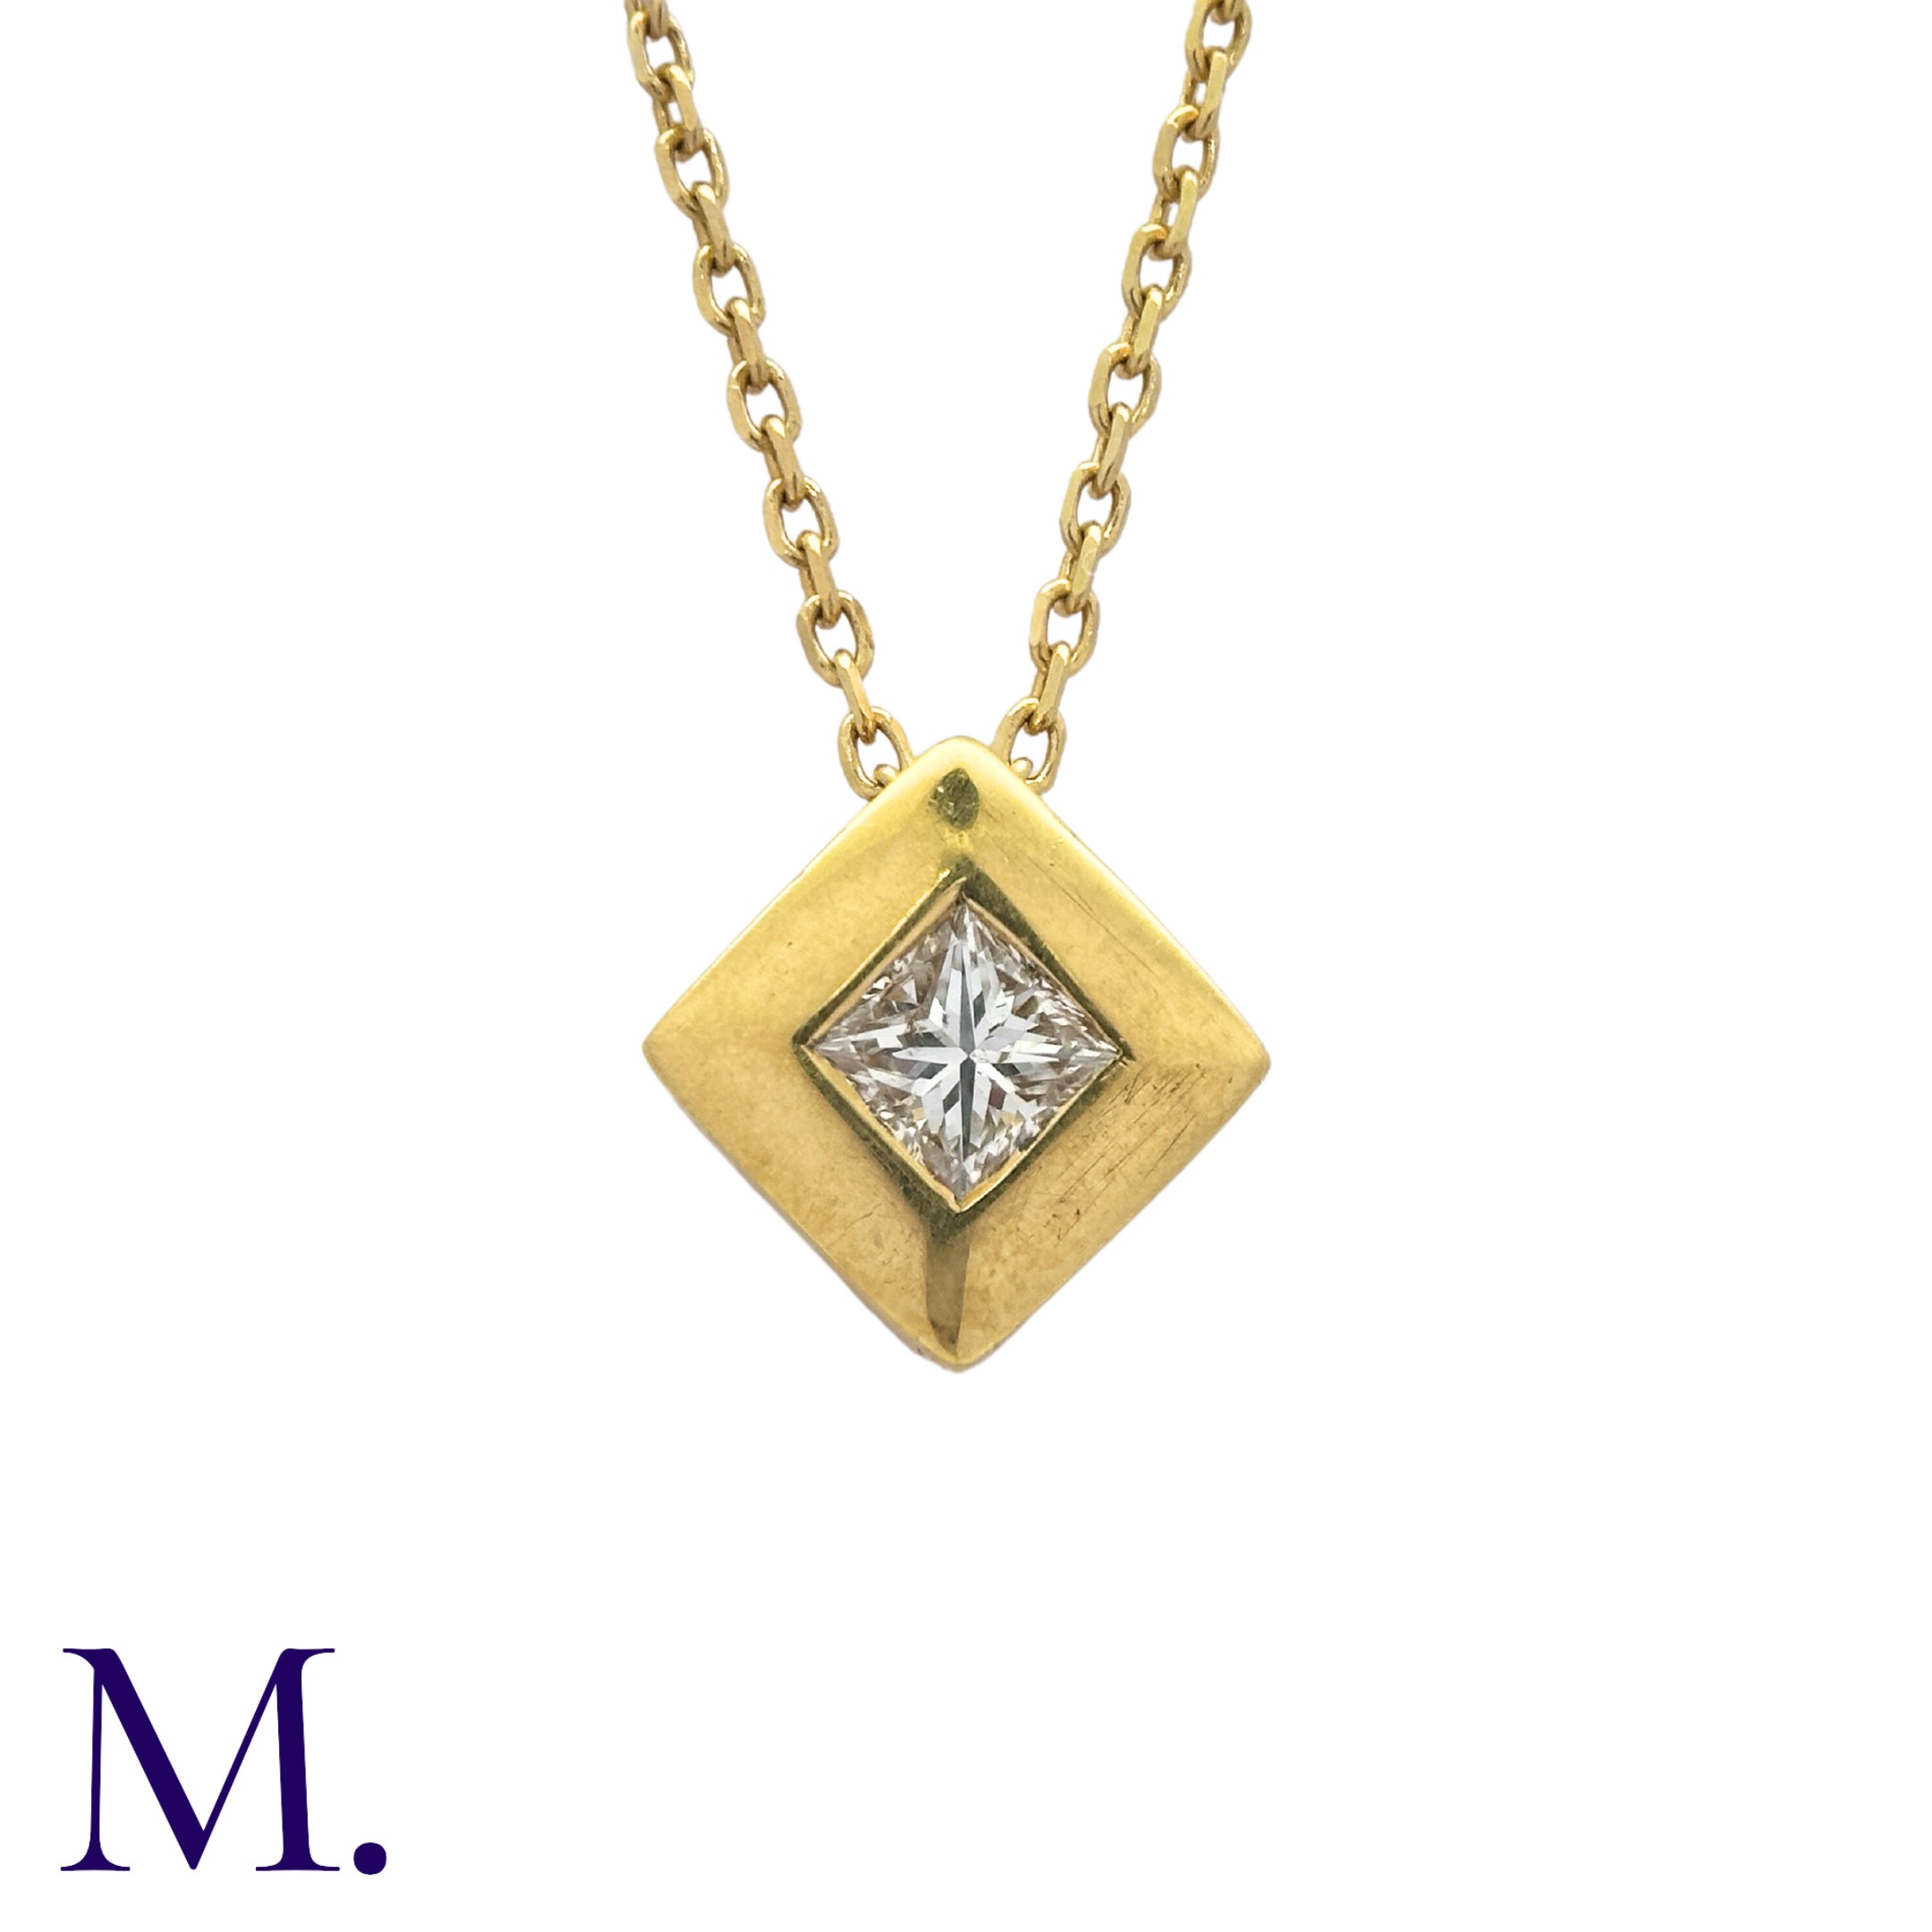 A Diamond Pendant and Chain in 18K yellow gold, the pendant set with a princess-cut diamond weighing